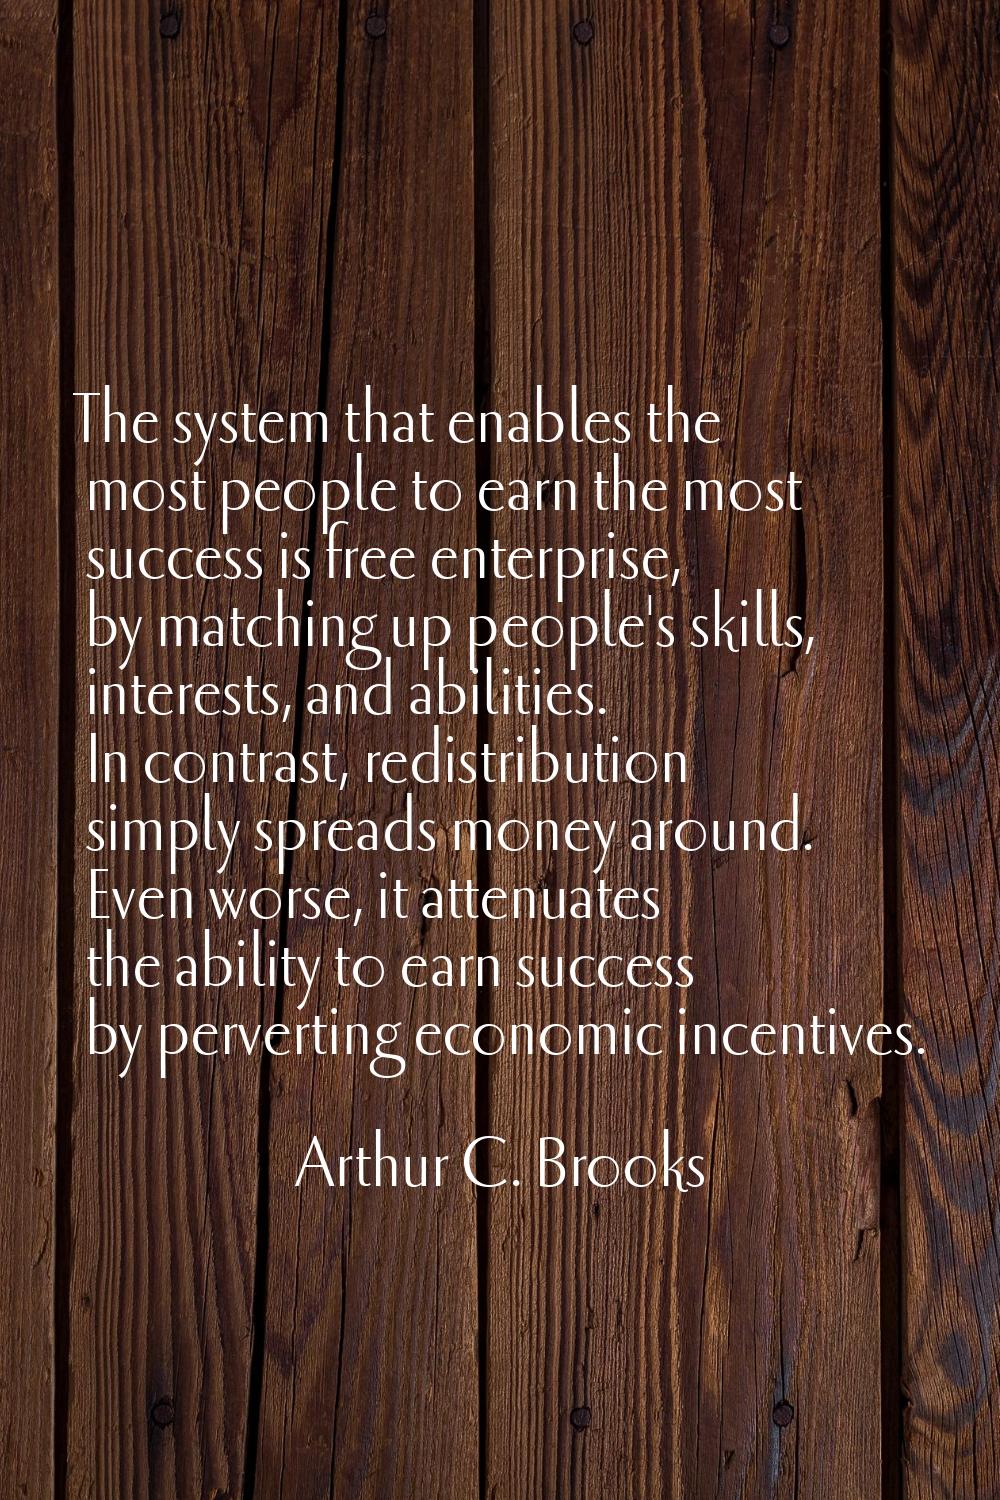 The system that enables the most people to earn the most success is free enterprise, by matching up